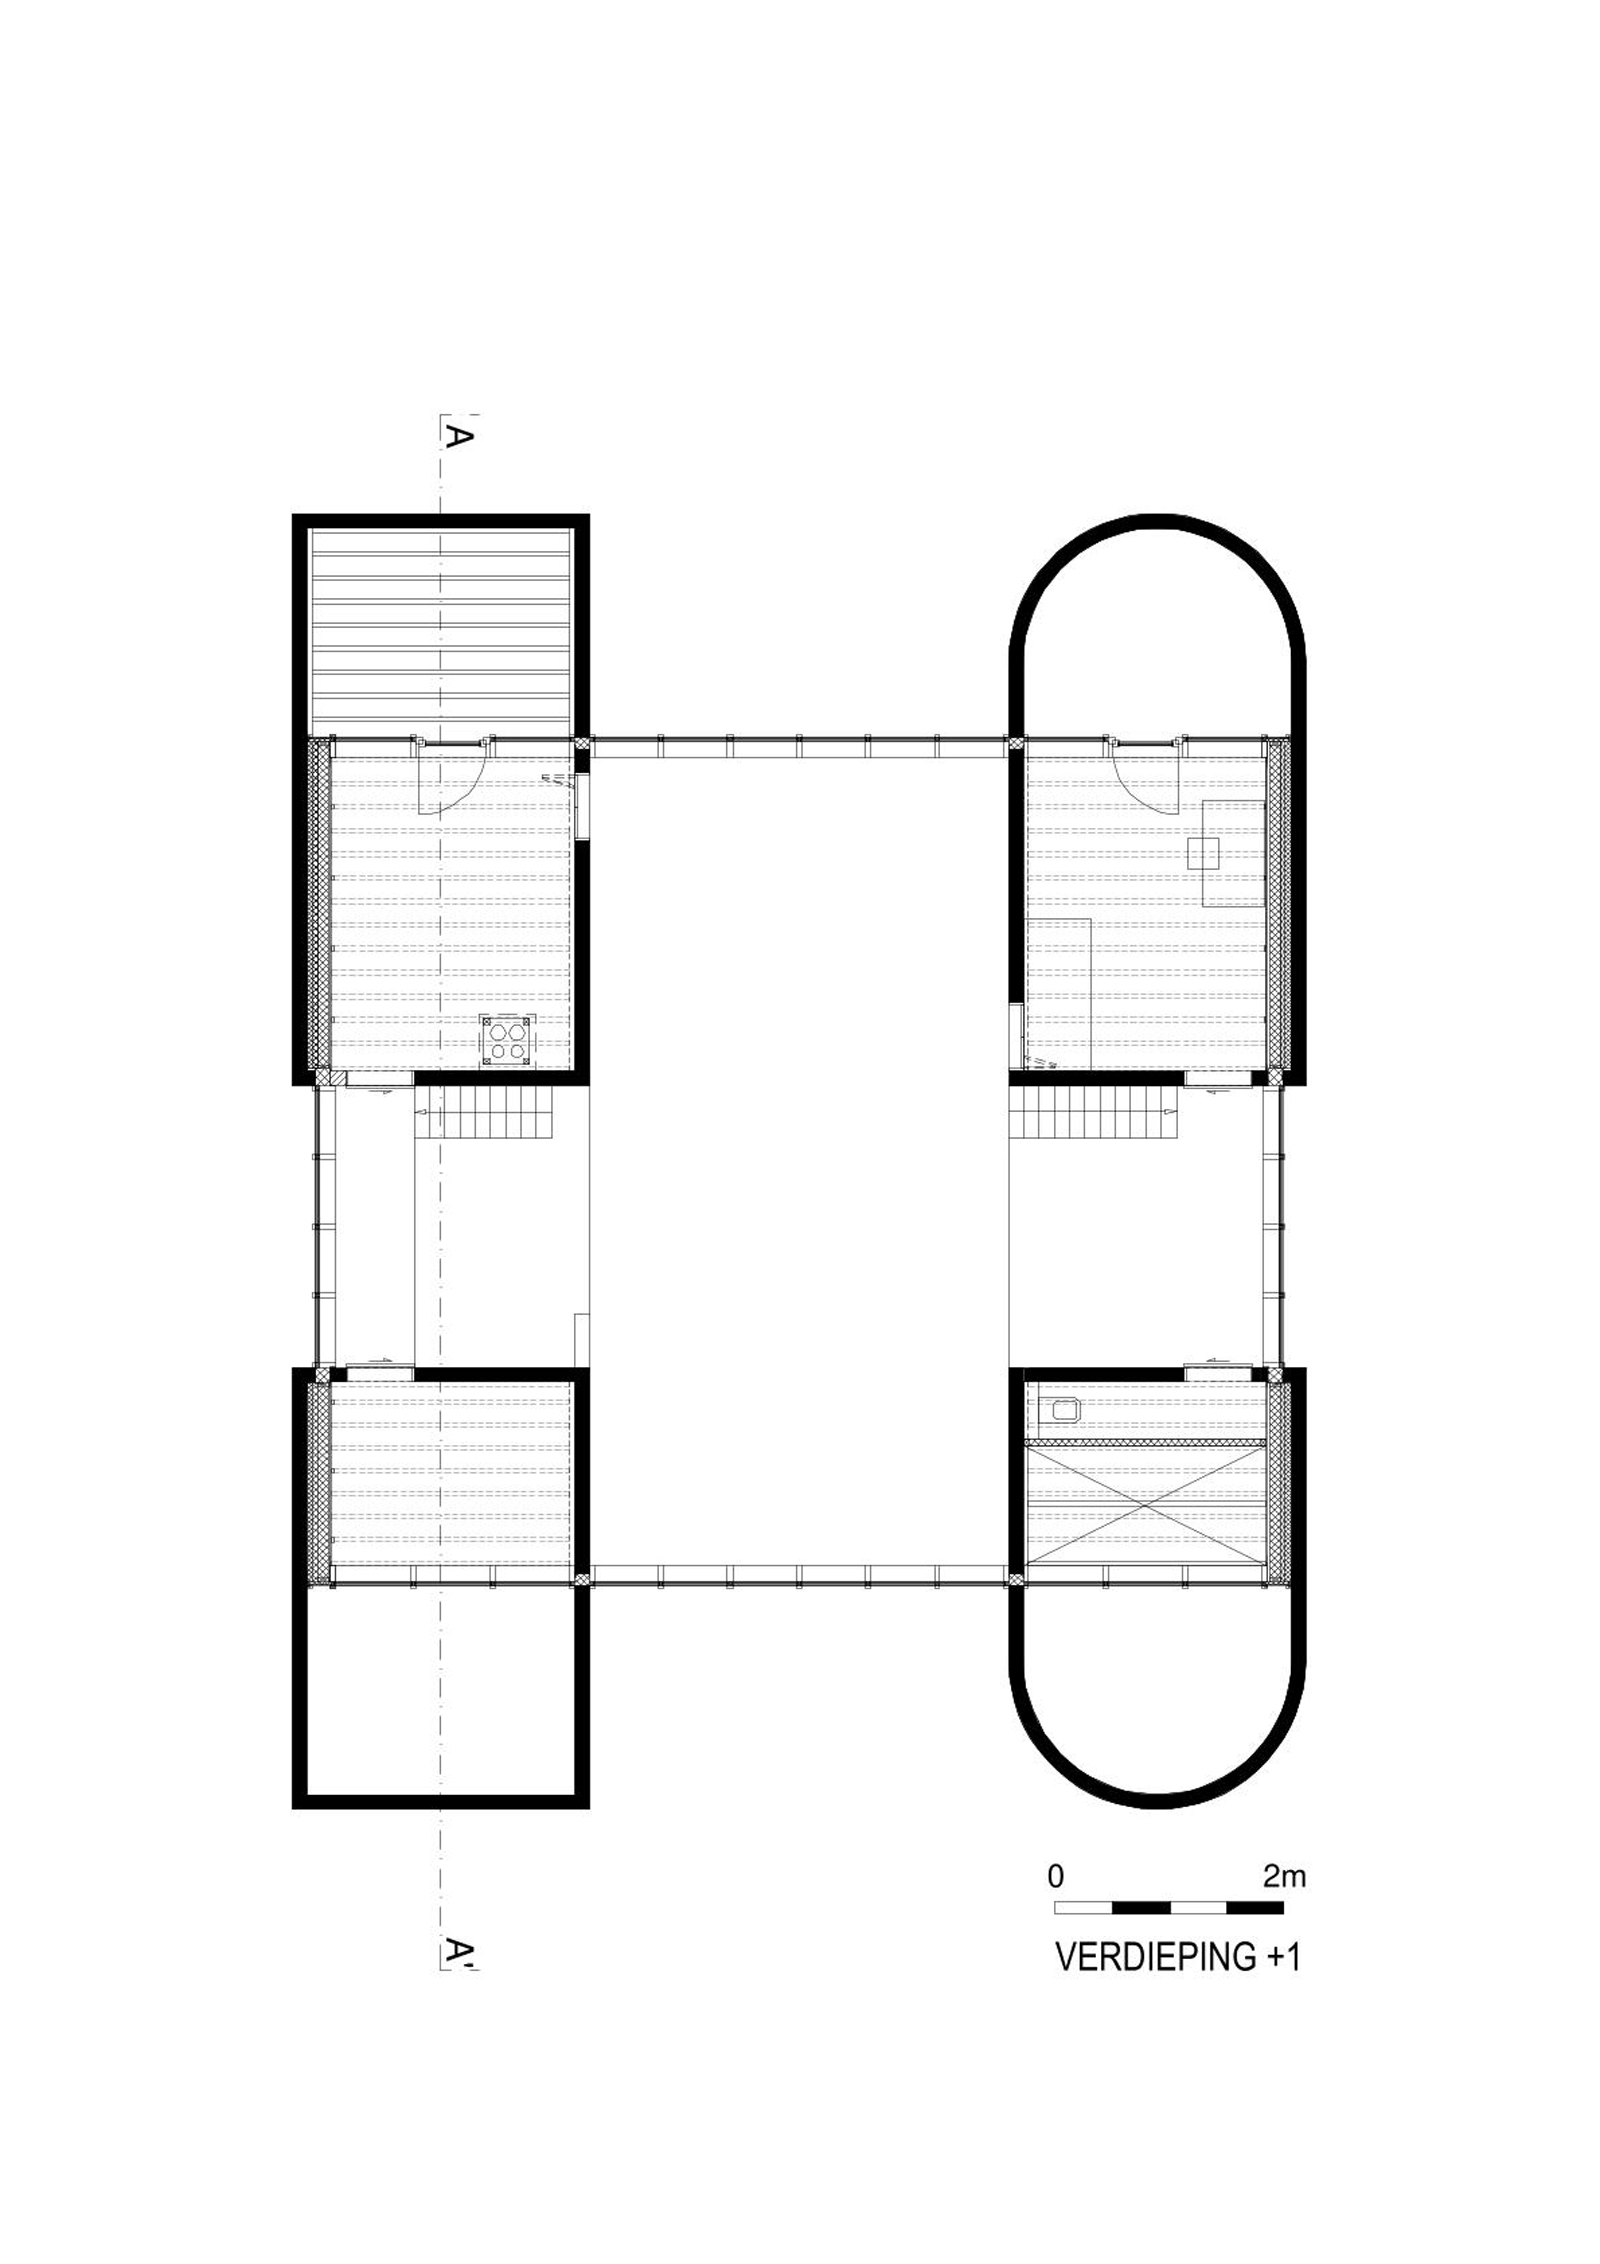 Image of 20220308 BLAF Architects fmM 13.2 in fmM House - Cosentino